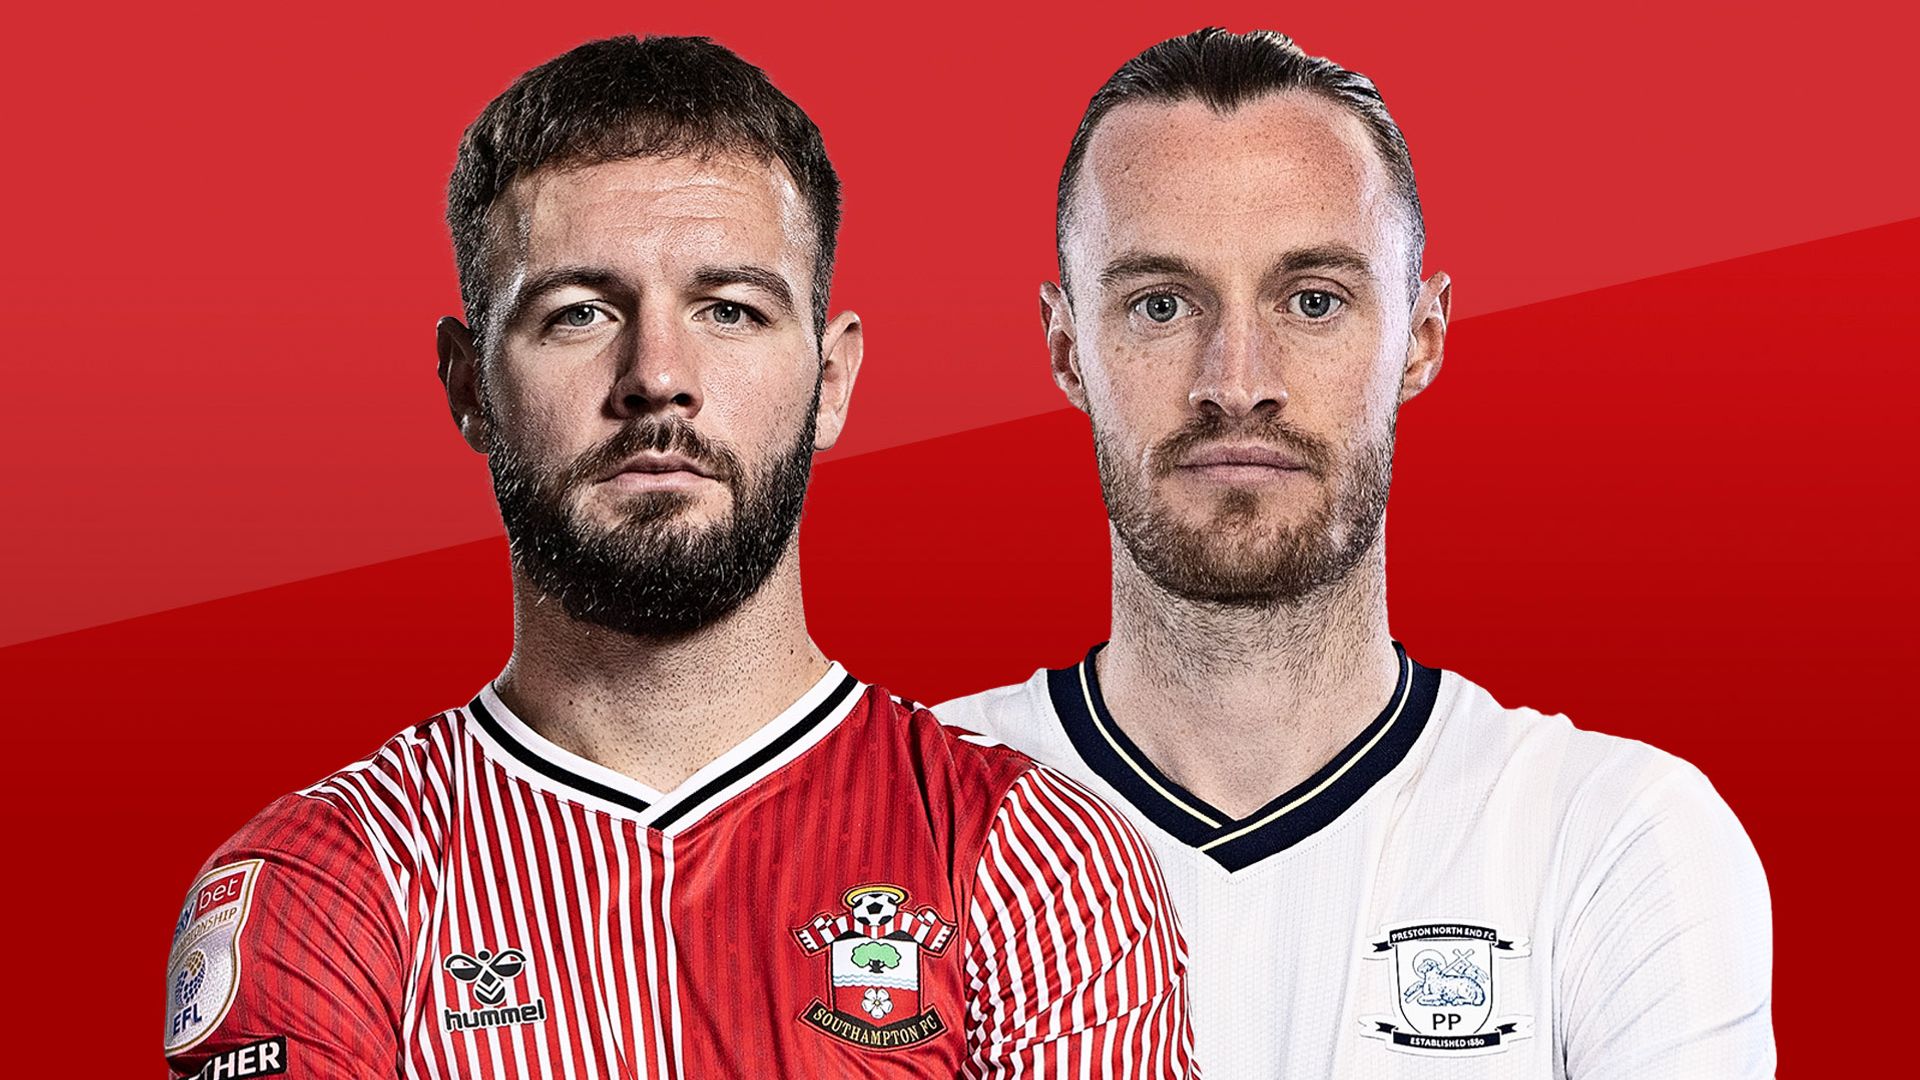 What's live on Sky today? Southampton vs Preston and Nadal's return from injury